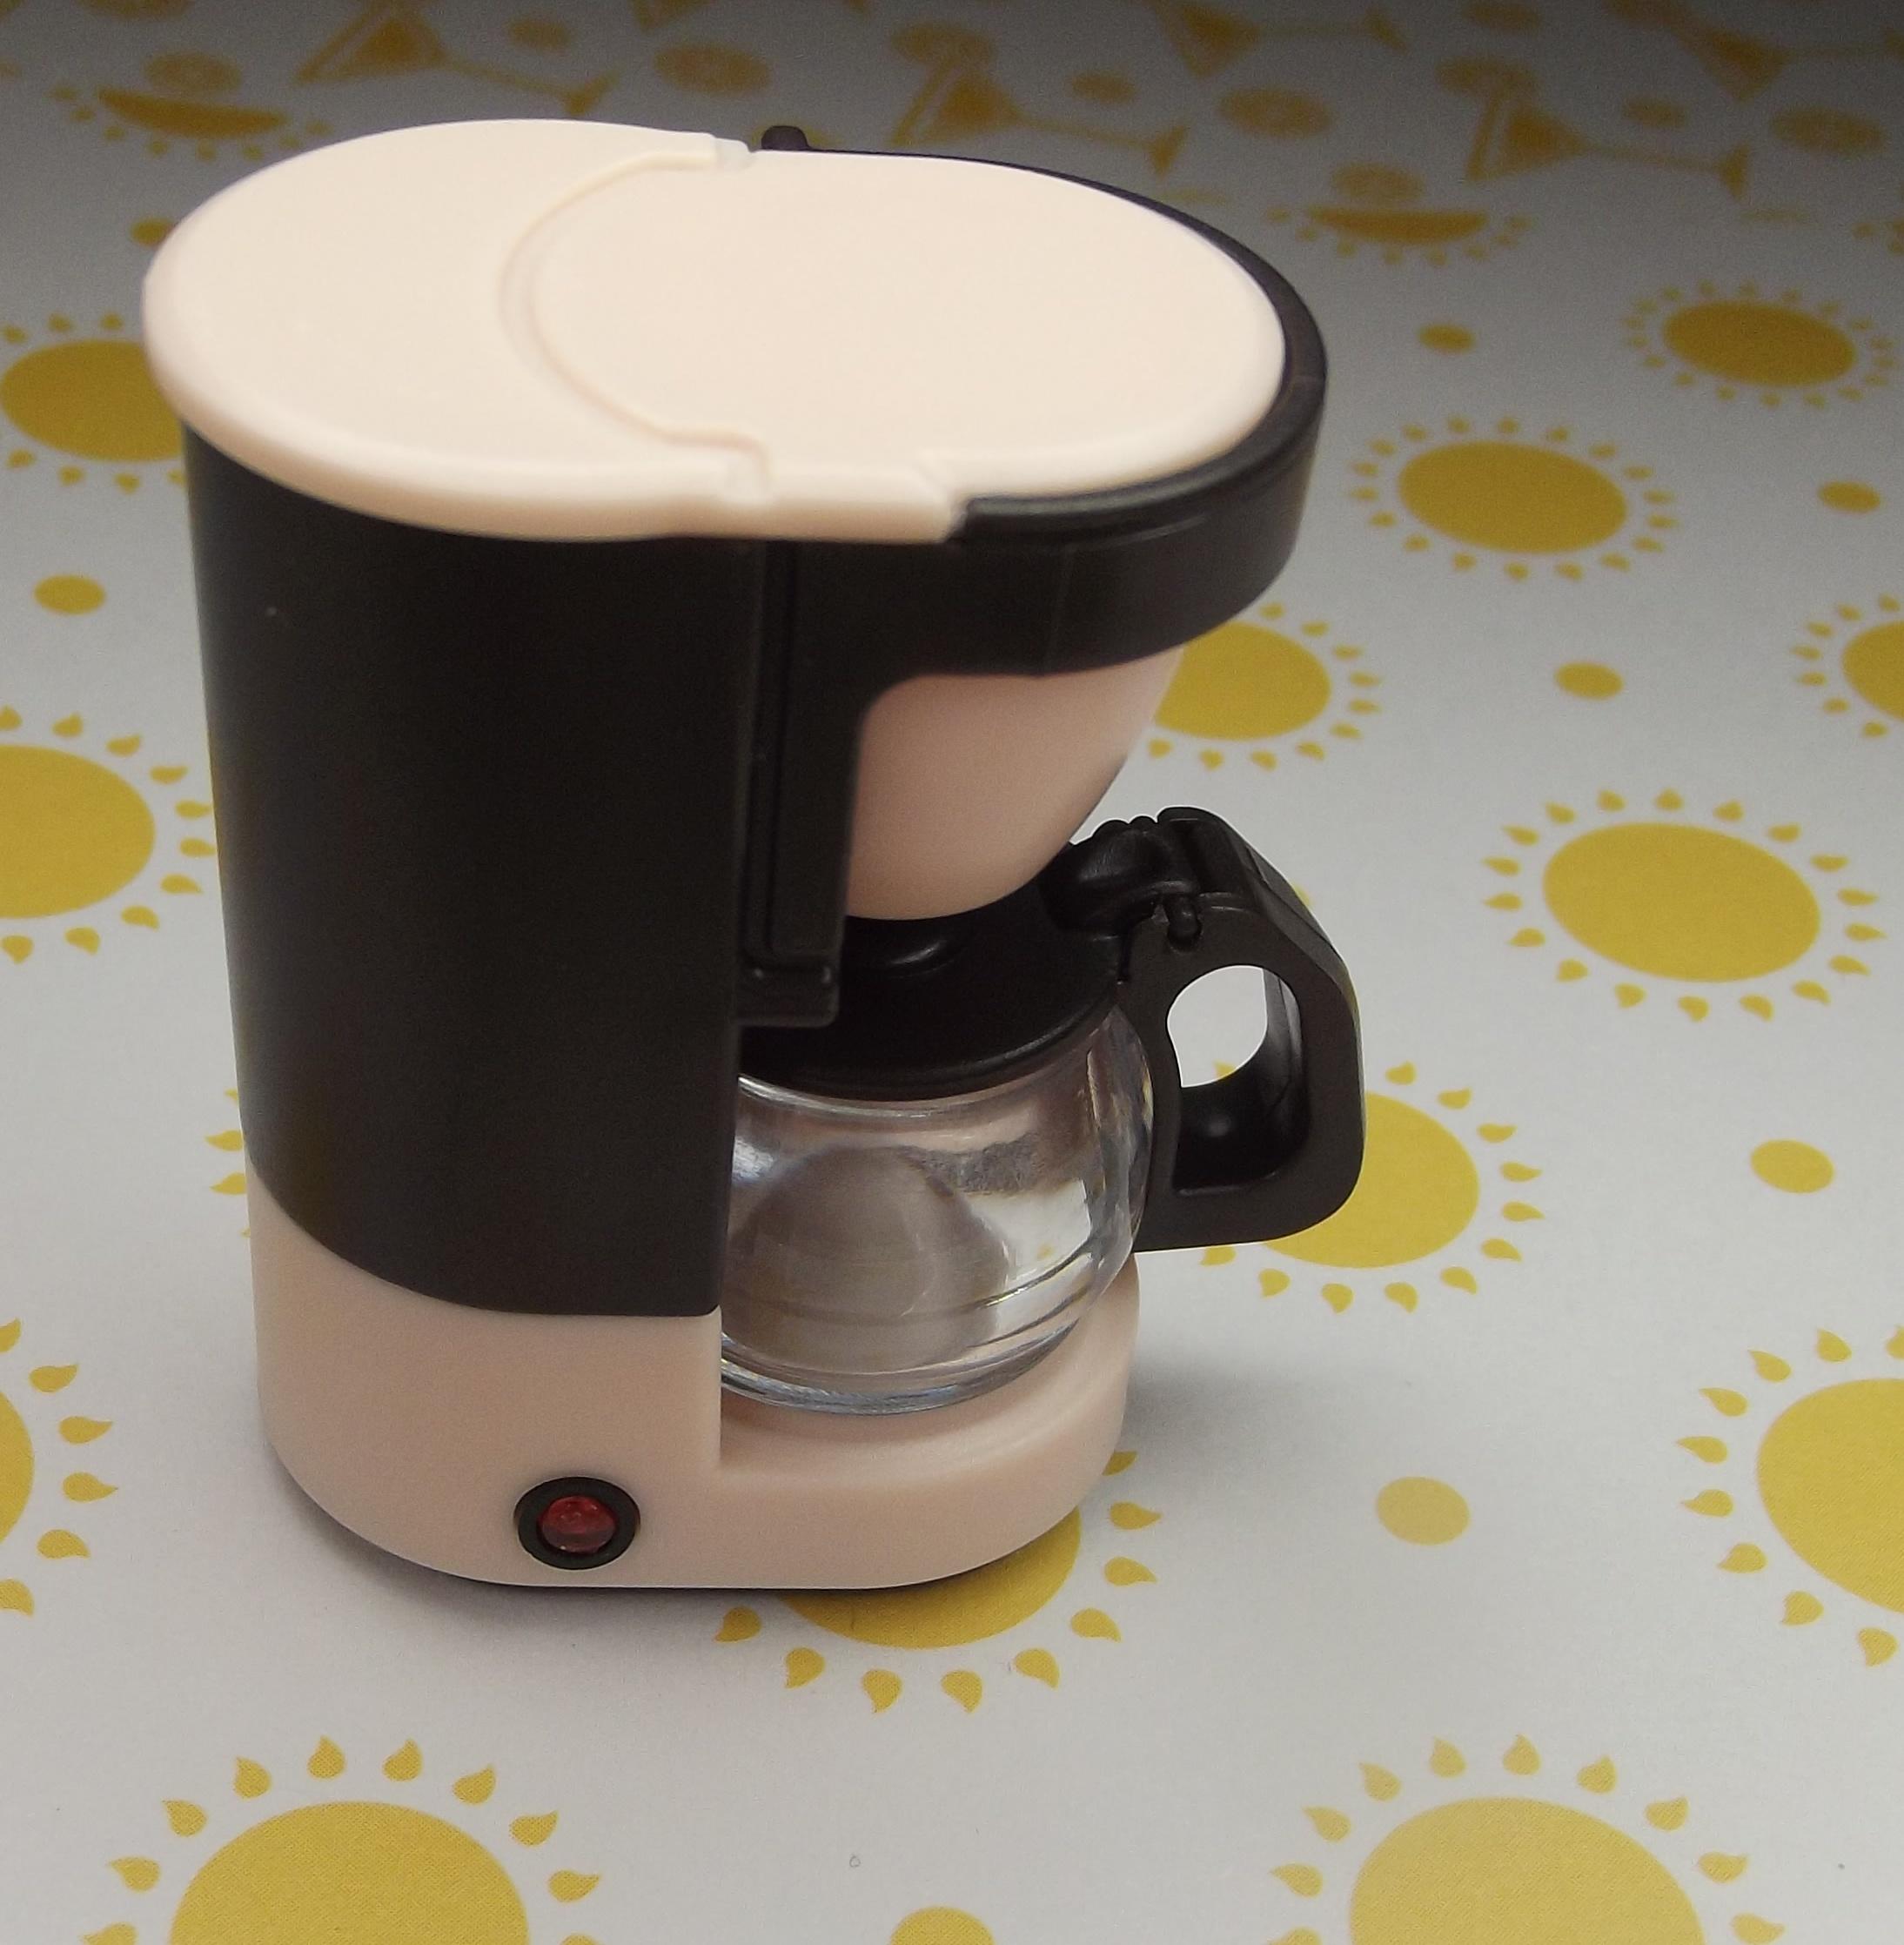 Sixth Scale Coffee Maker